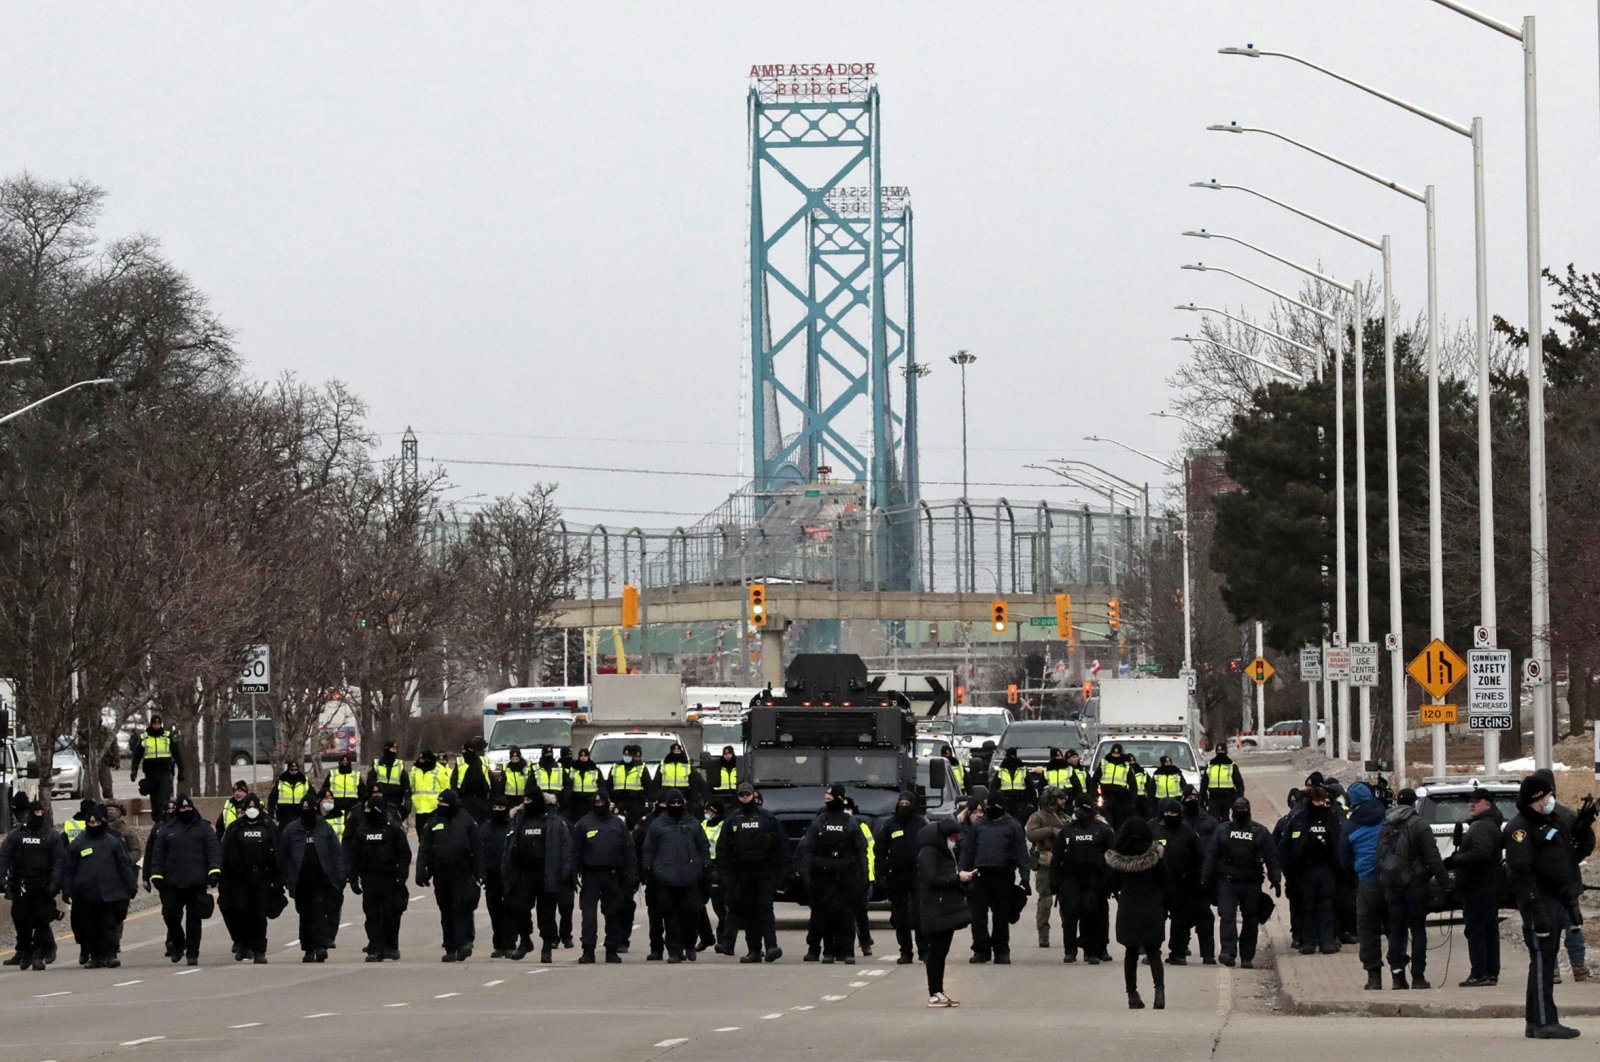 Police gather to disperse protestors against Covid-19 vaccine mandates who blocked the entrance to the Ambassador Bridge in Windsor, Ontario, Canada, Feb. 13, 2022. (AFP)